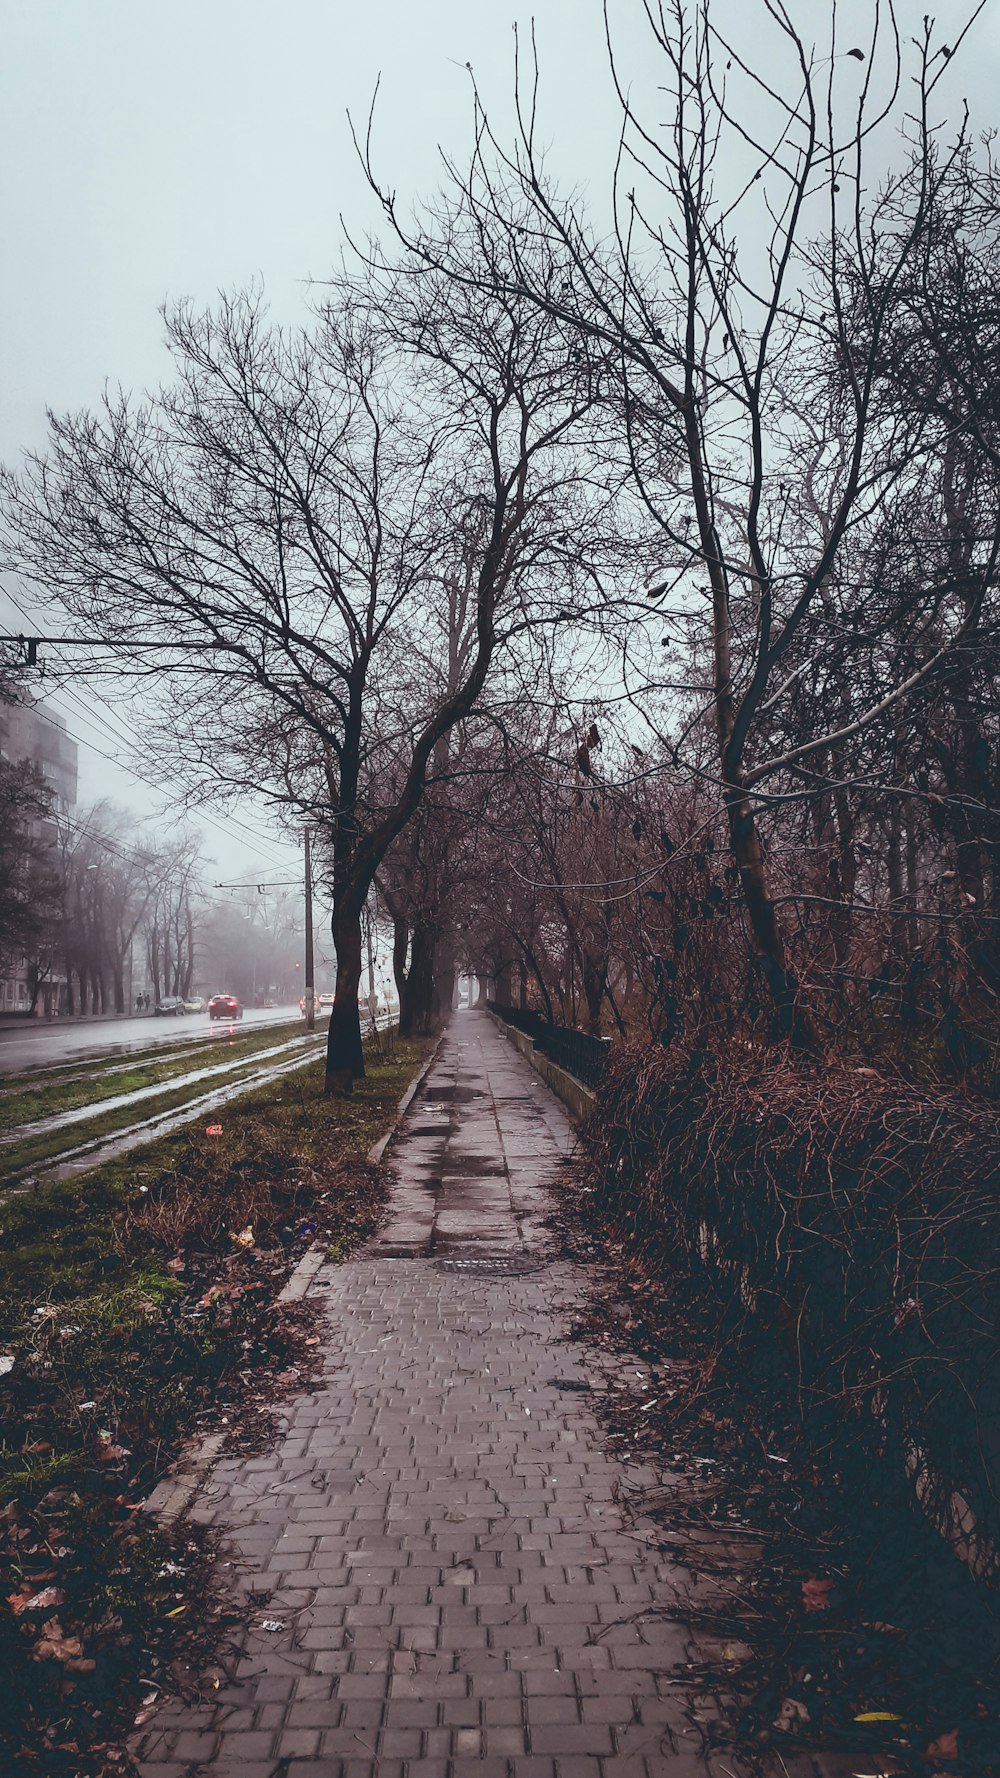 gray concrete pathway surrounded with bare trees and few vehicles on road in foggy day